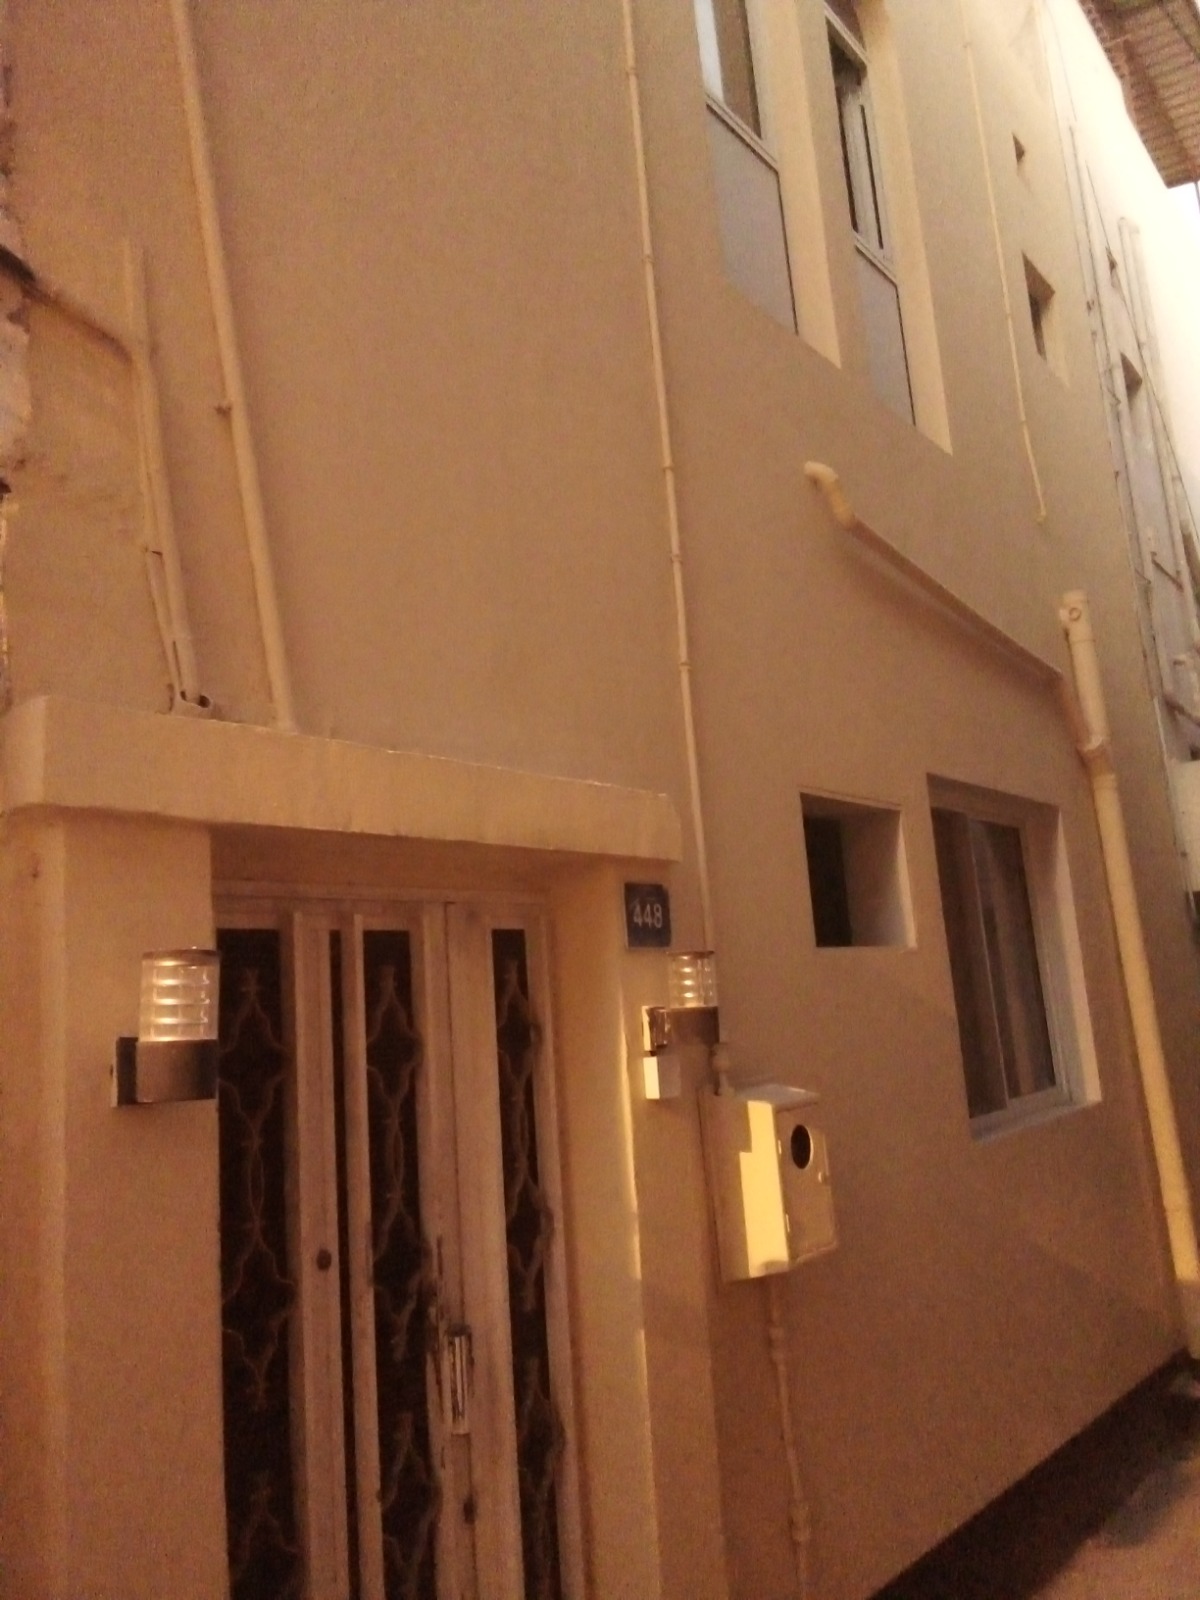 House For Sale In Muharraq